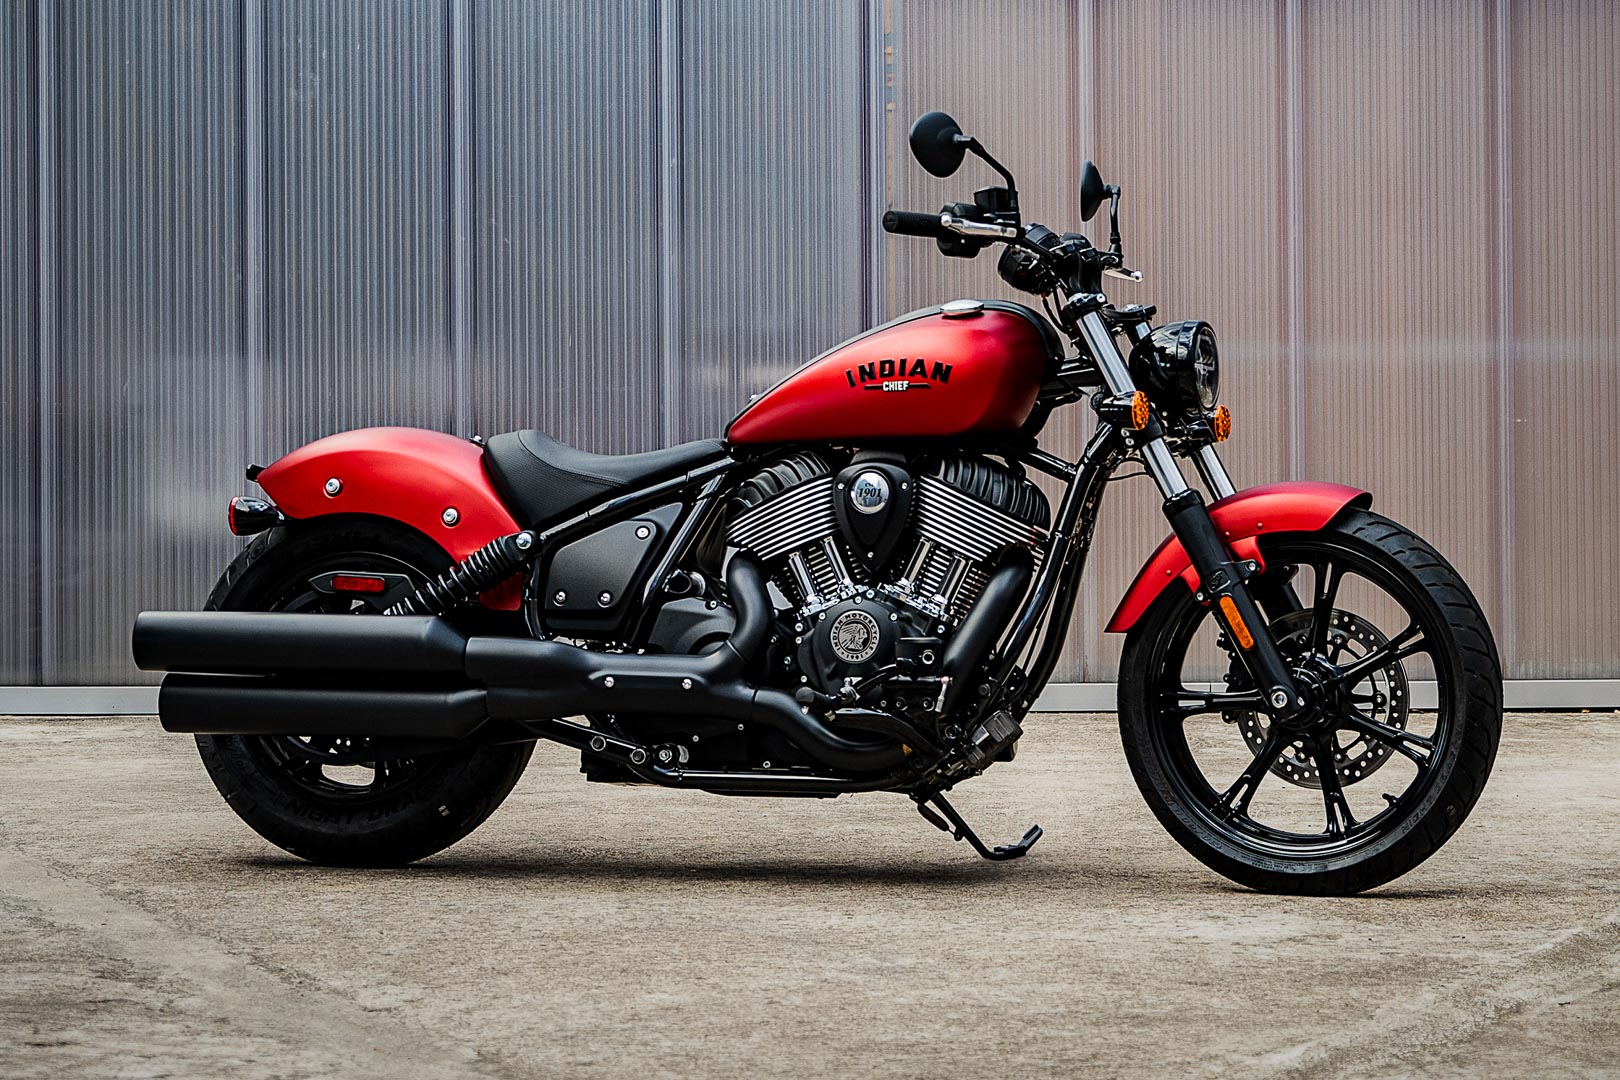  Indian's new 2021 Chief Motorcycle in red